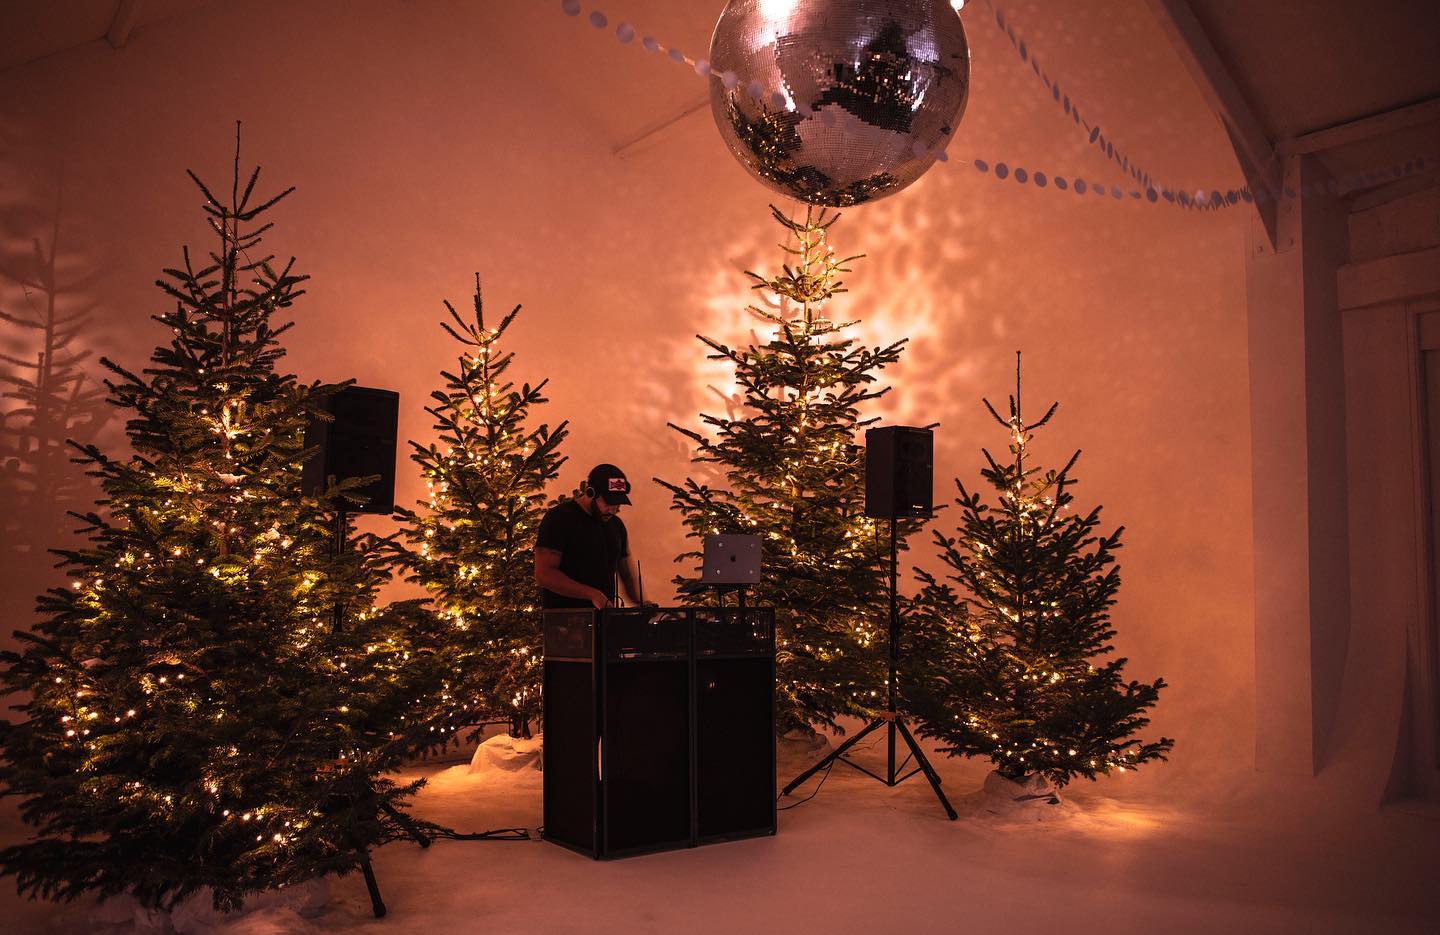 Christmas Parties at fivefourstudios ✨ …

2023 packages now available! More information can be found on our website via the link in our bio. 

#christmas #christmasparty #party #xmas #christmaspartyideas #christmaspartydecor #christmastree #events #eventlocation #eventvenue #venue #venuehire #venuehiremanchester #corporatechristmasparty #corporateevents #manchestervenue #fivefourstudios #manchester